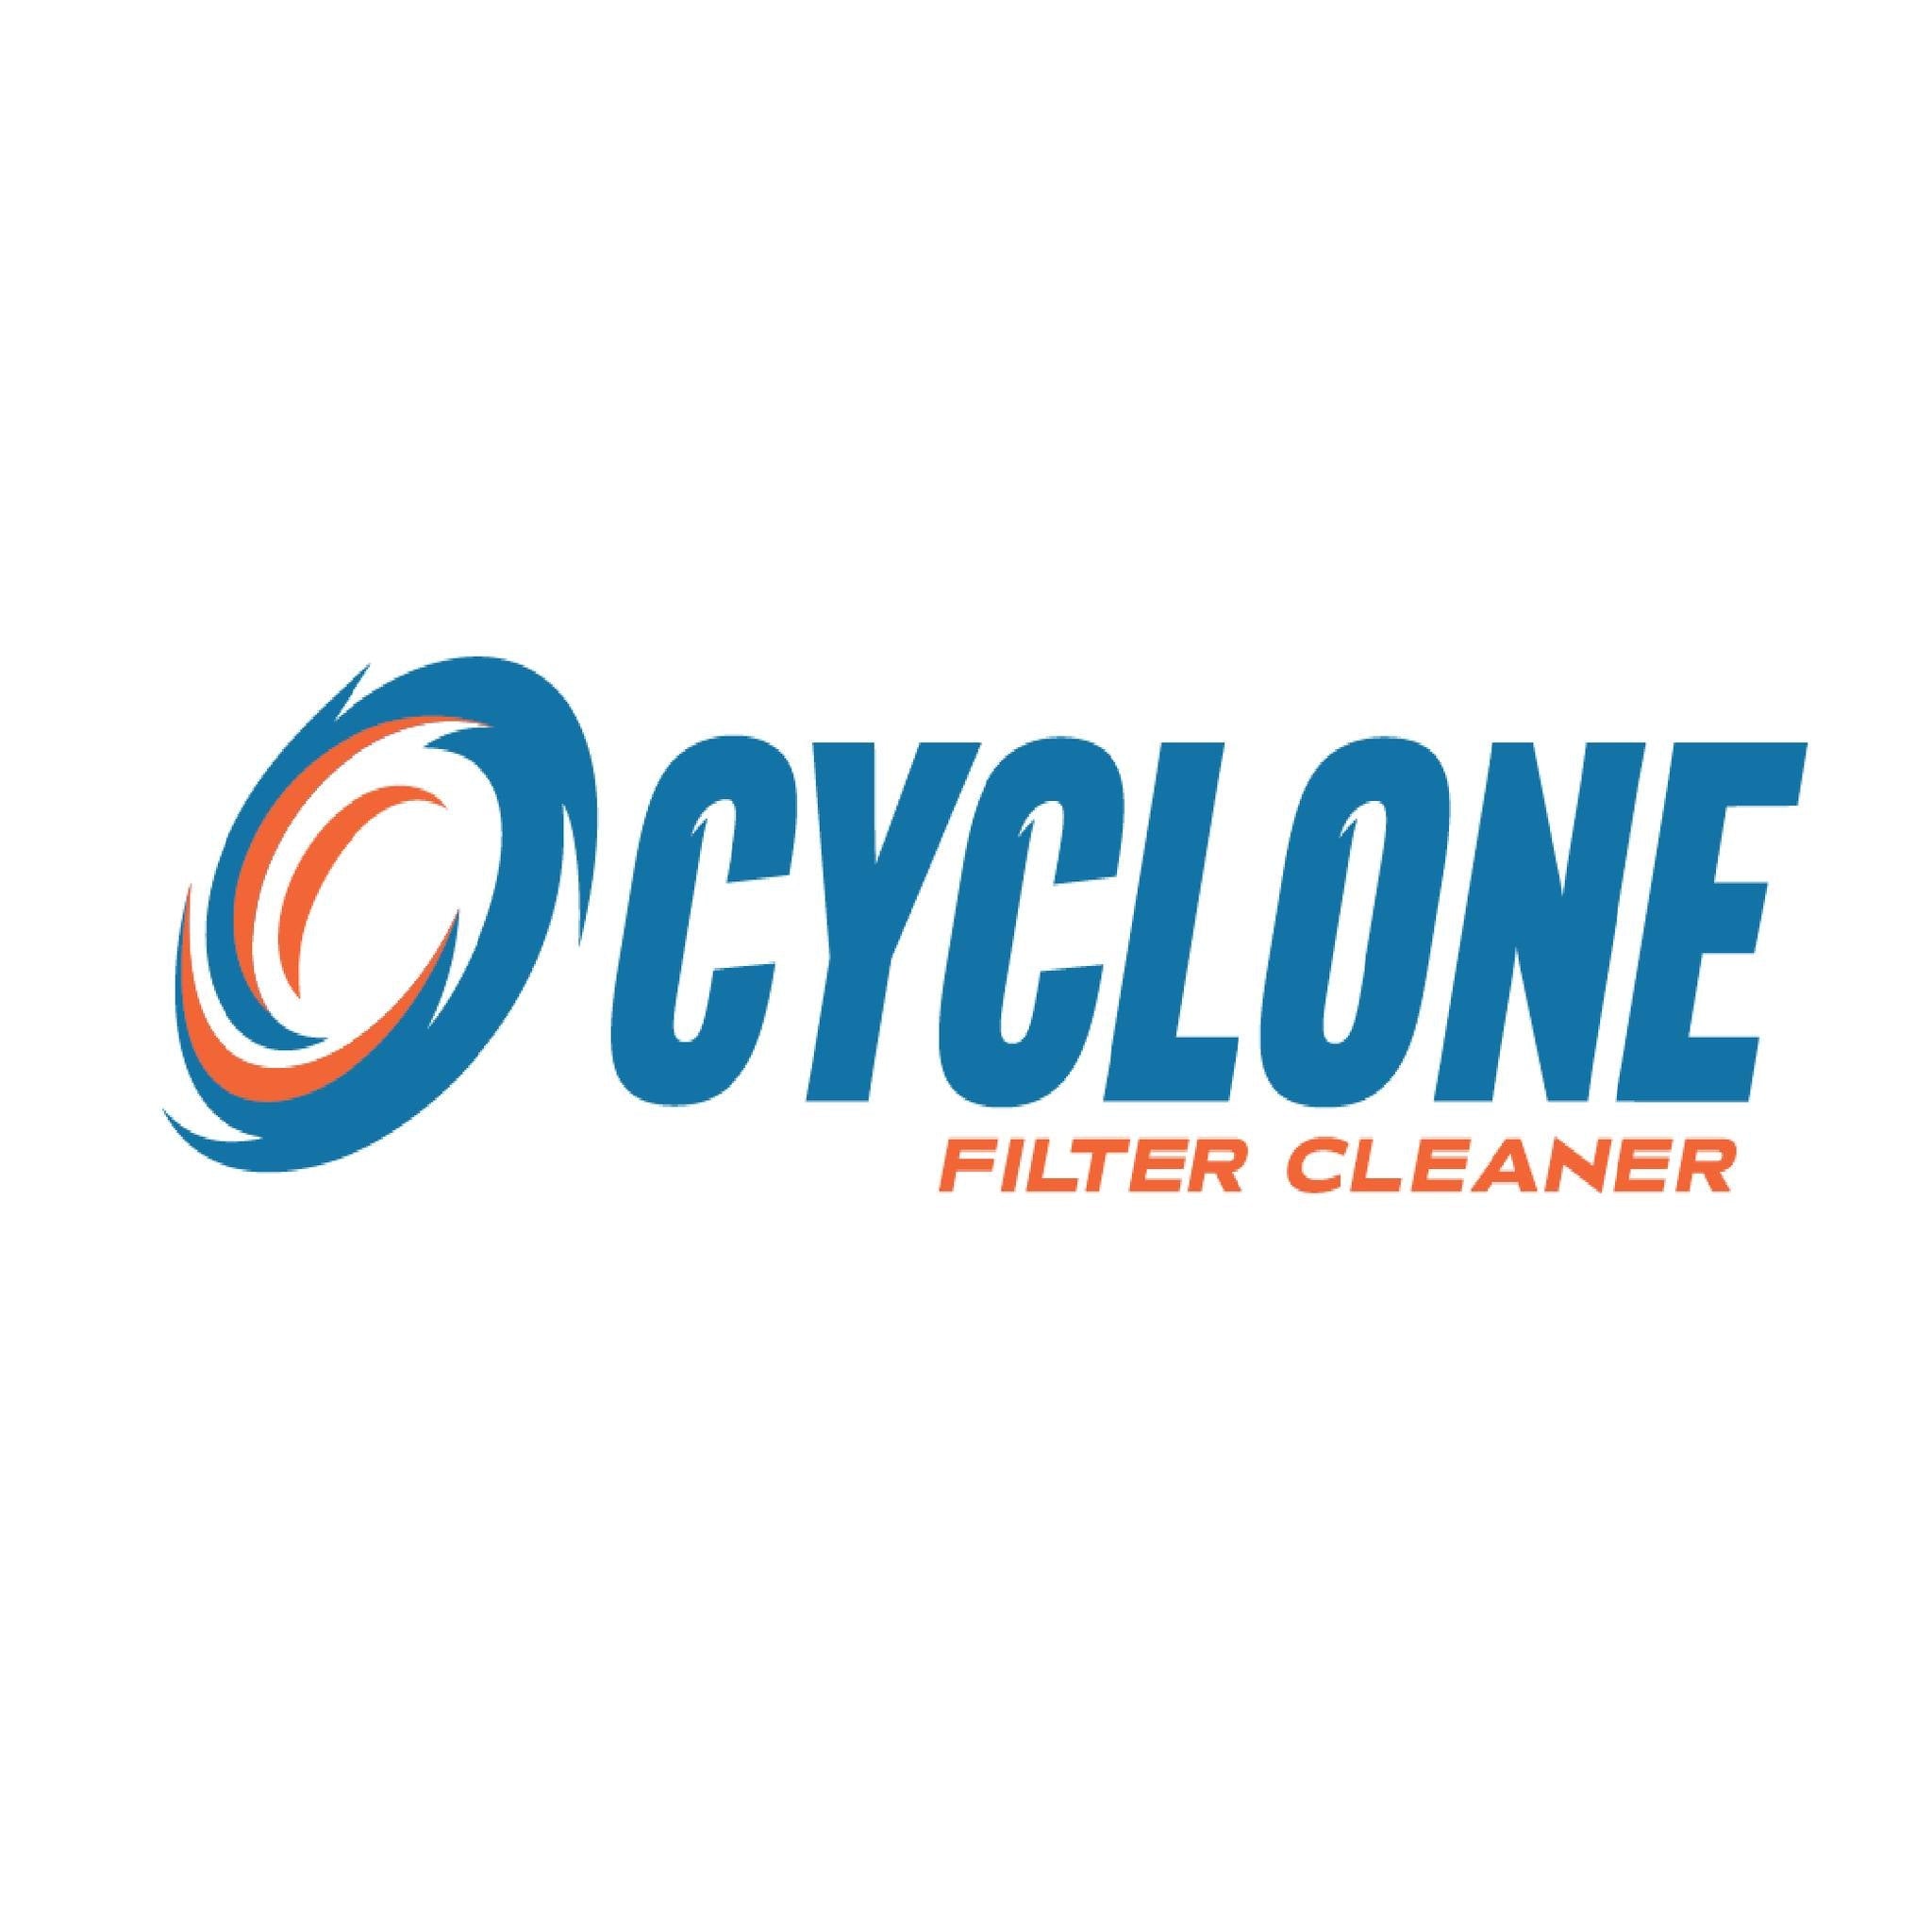 The Cyclone Filter Cleaner-Cyclone Filter Cleaner